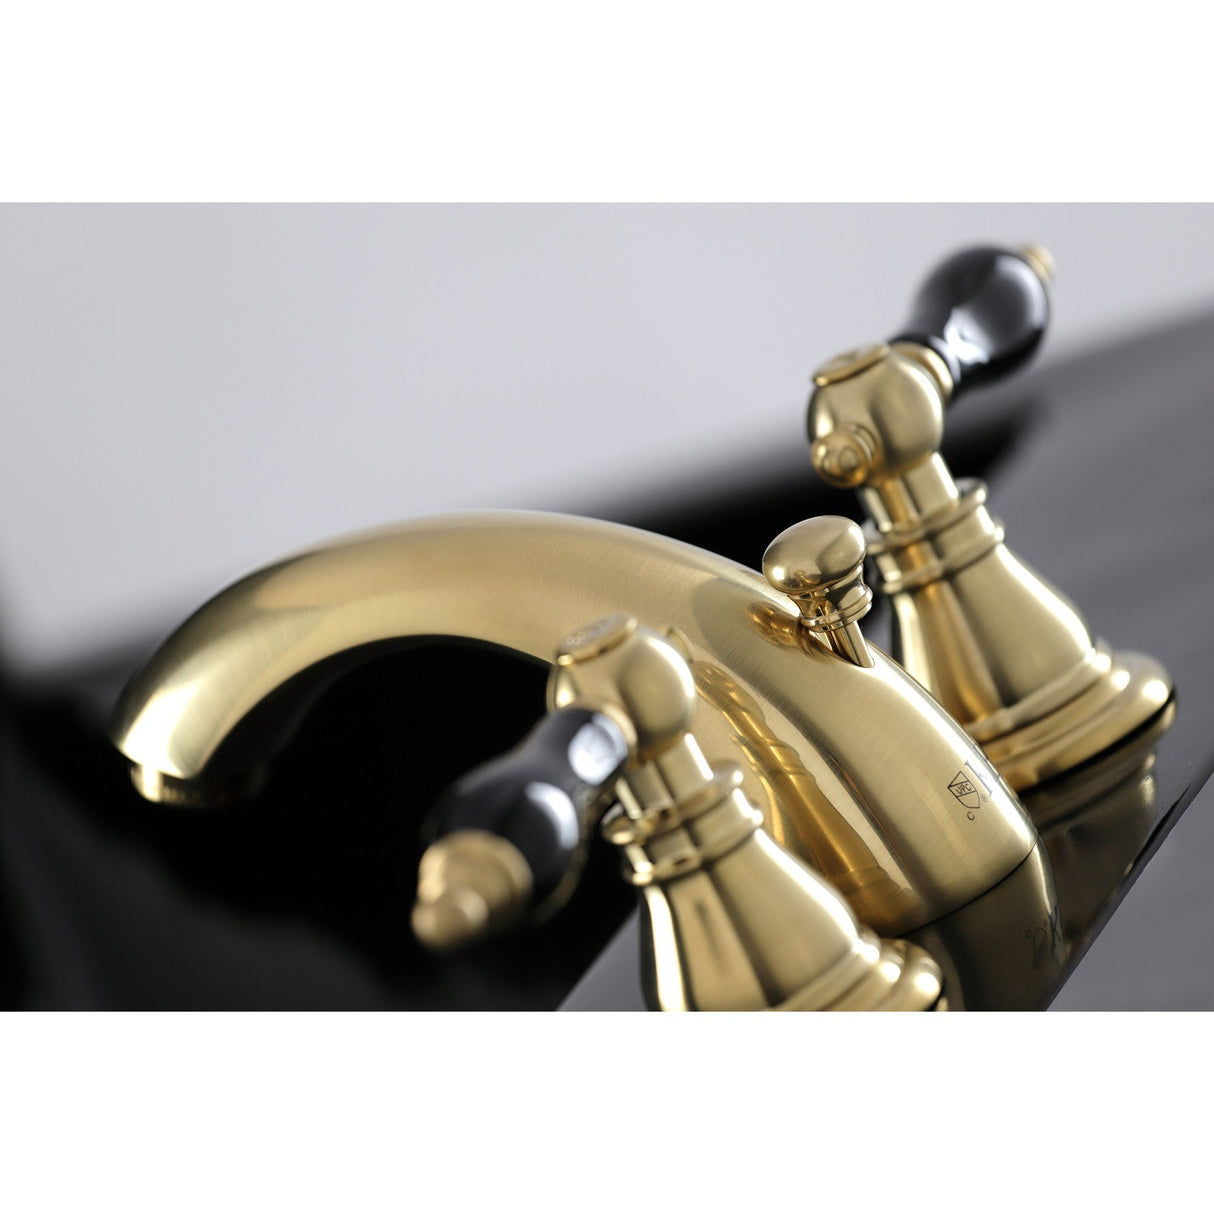 Duchess KB957AKLSB Two-Handle 3-Hole Deck Mount Mini-Widespread Bathroom Faucet with Plastic Pop-Up, Brushed Brass